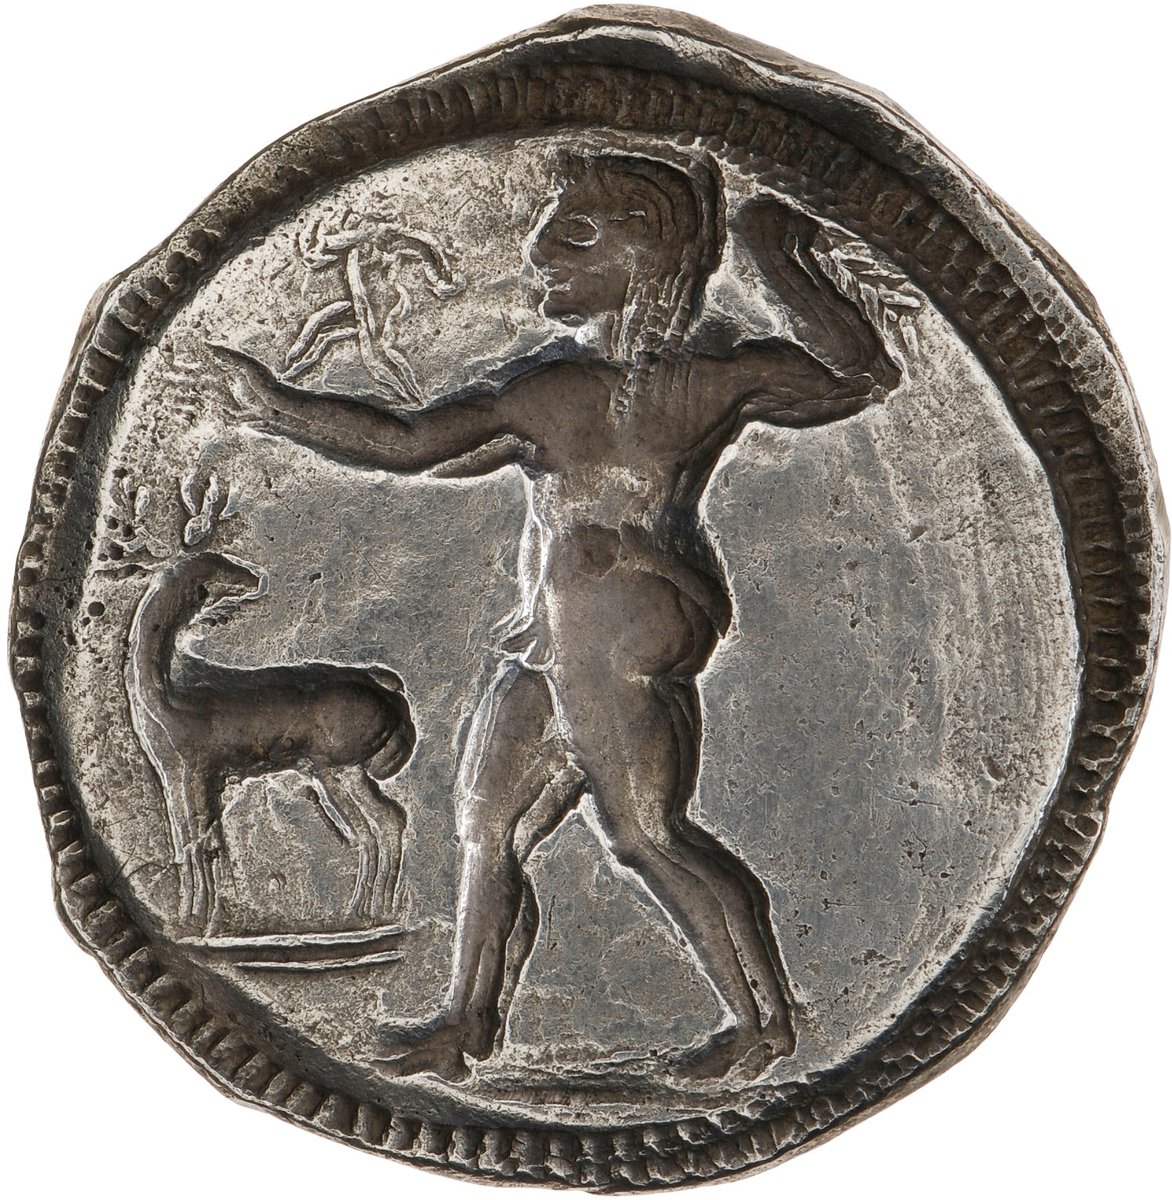 Ancient Coin of the Day: A quick thread today, as I'm still sleepy! But an opportunity to look at some beautiful coins from Magna Graecia, starting with this silver stater of Caulonia, ca. 530-510 BC.  #ACOTD  #MagnaGraeciaImage: ANS 1941.153.172. Link -  http://numismatics.org/collection/1941.153.172